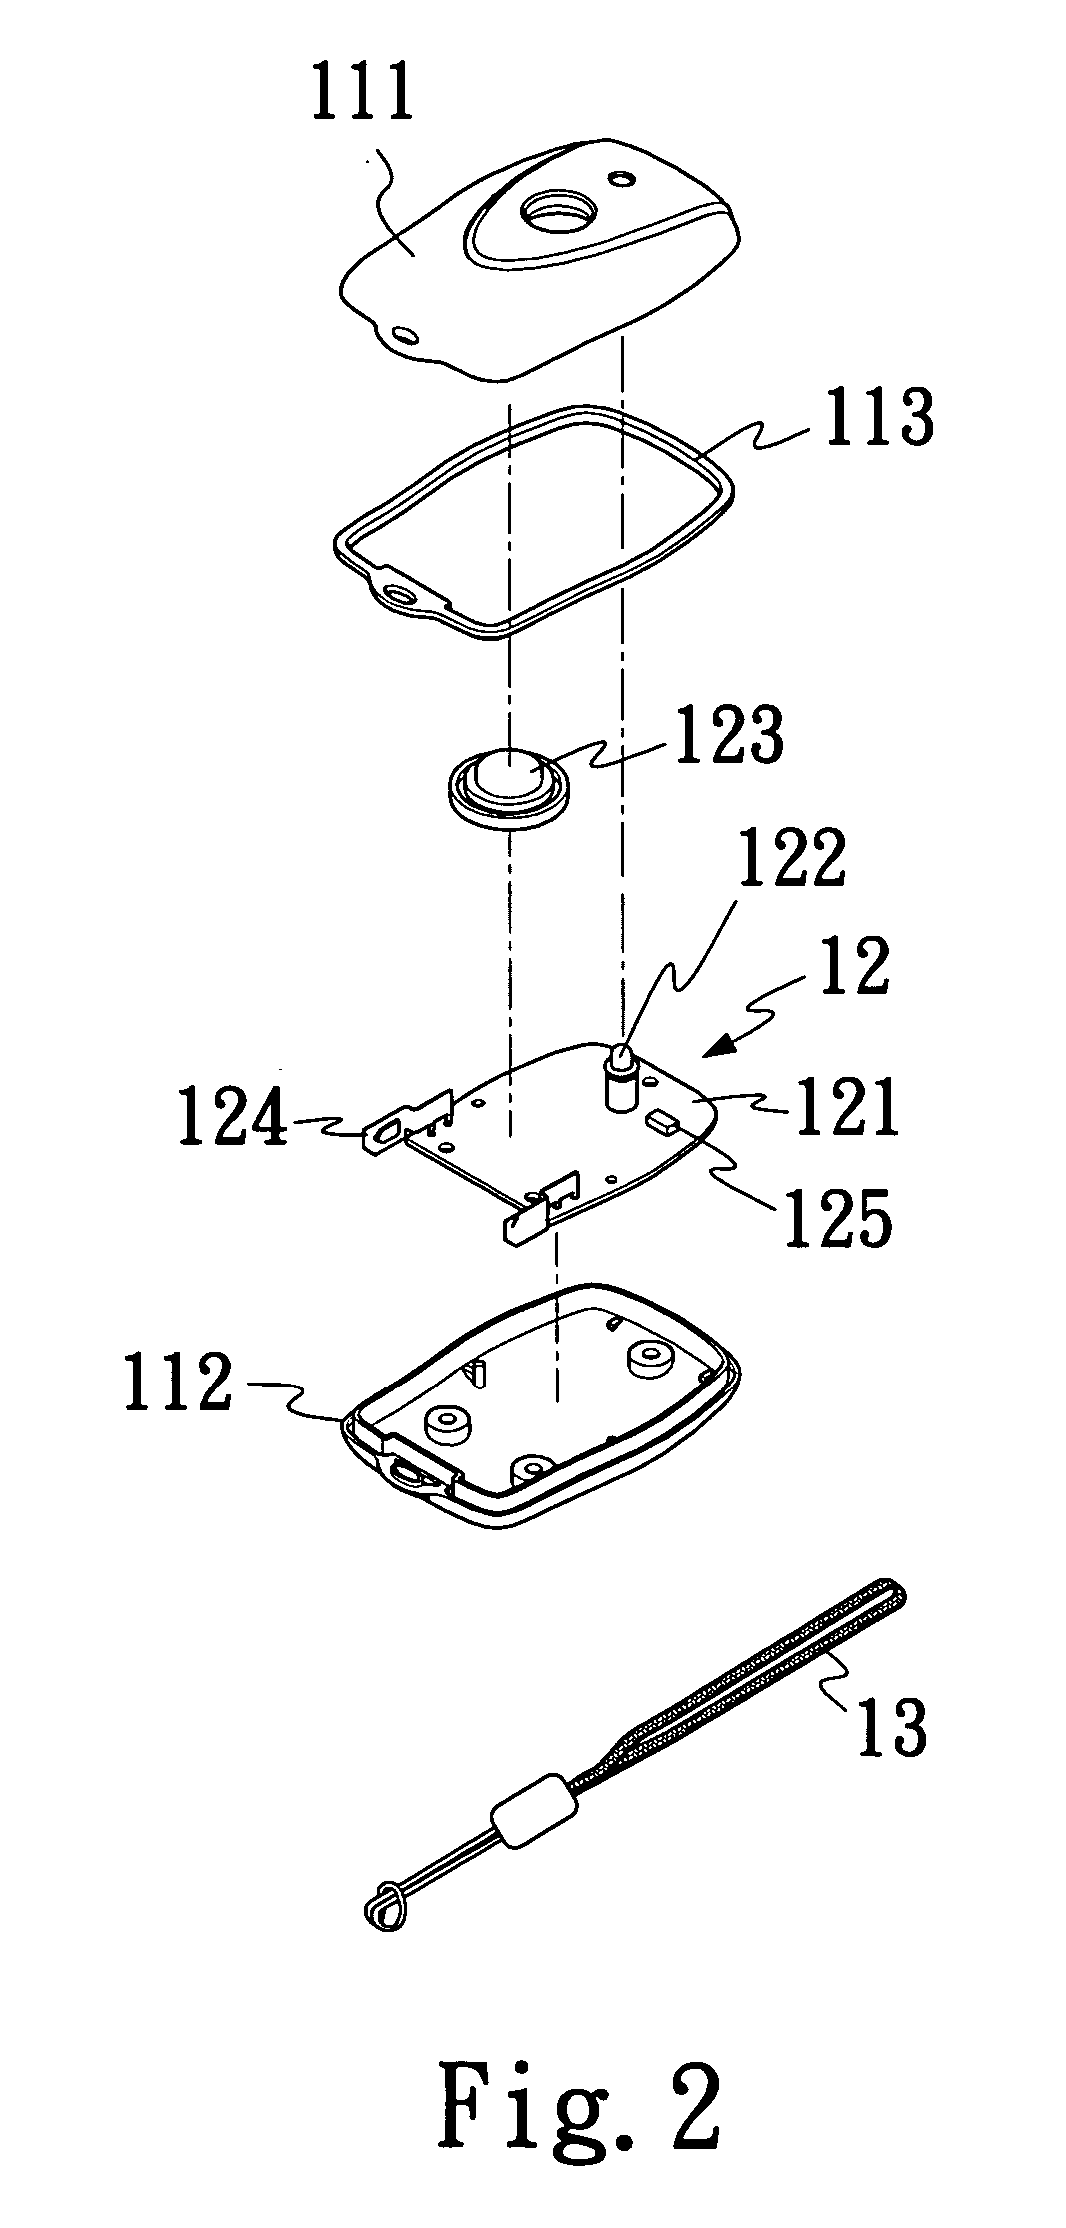 Portable radar alarm device having water and weather resistance